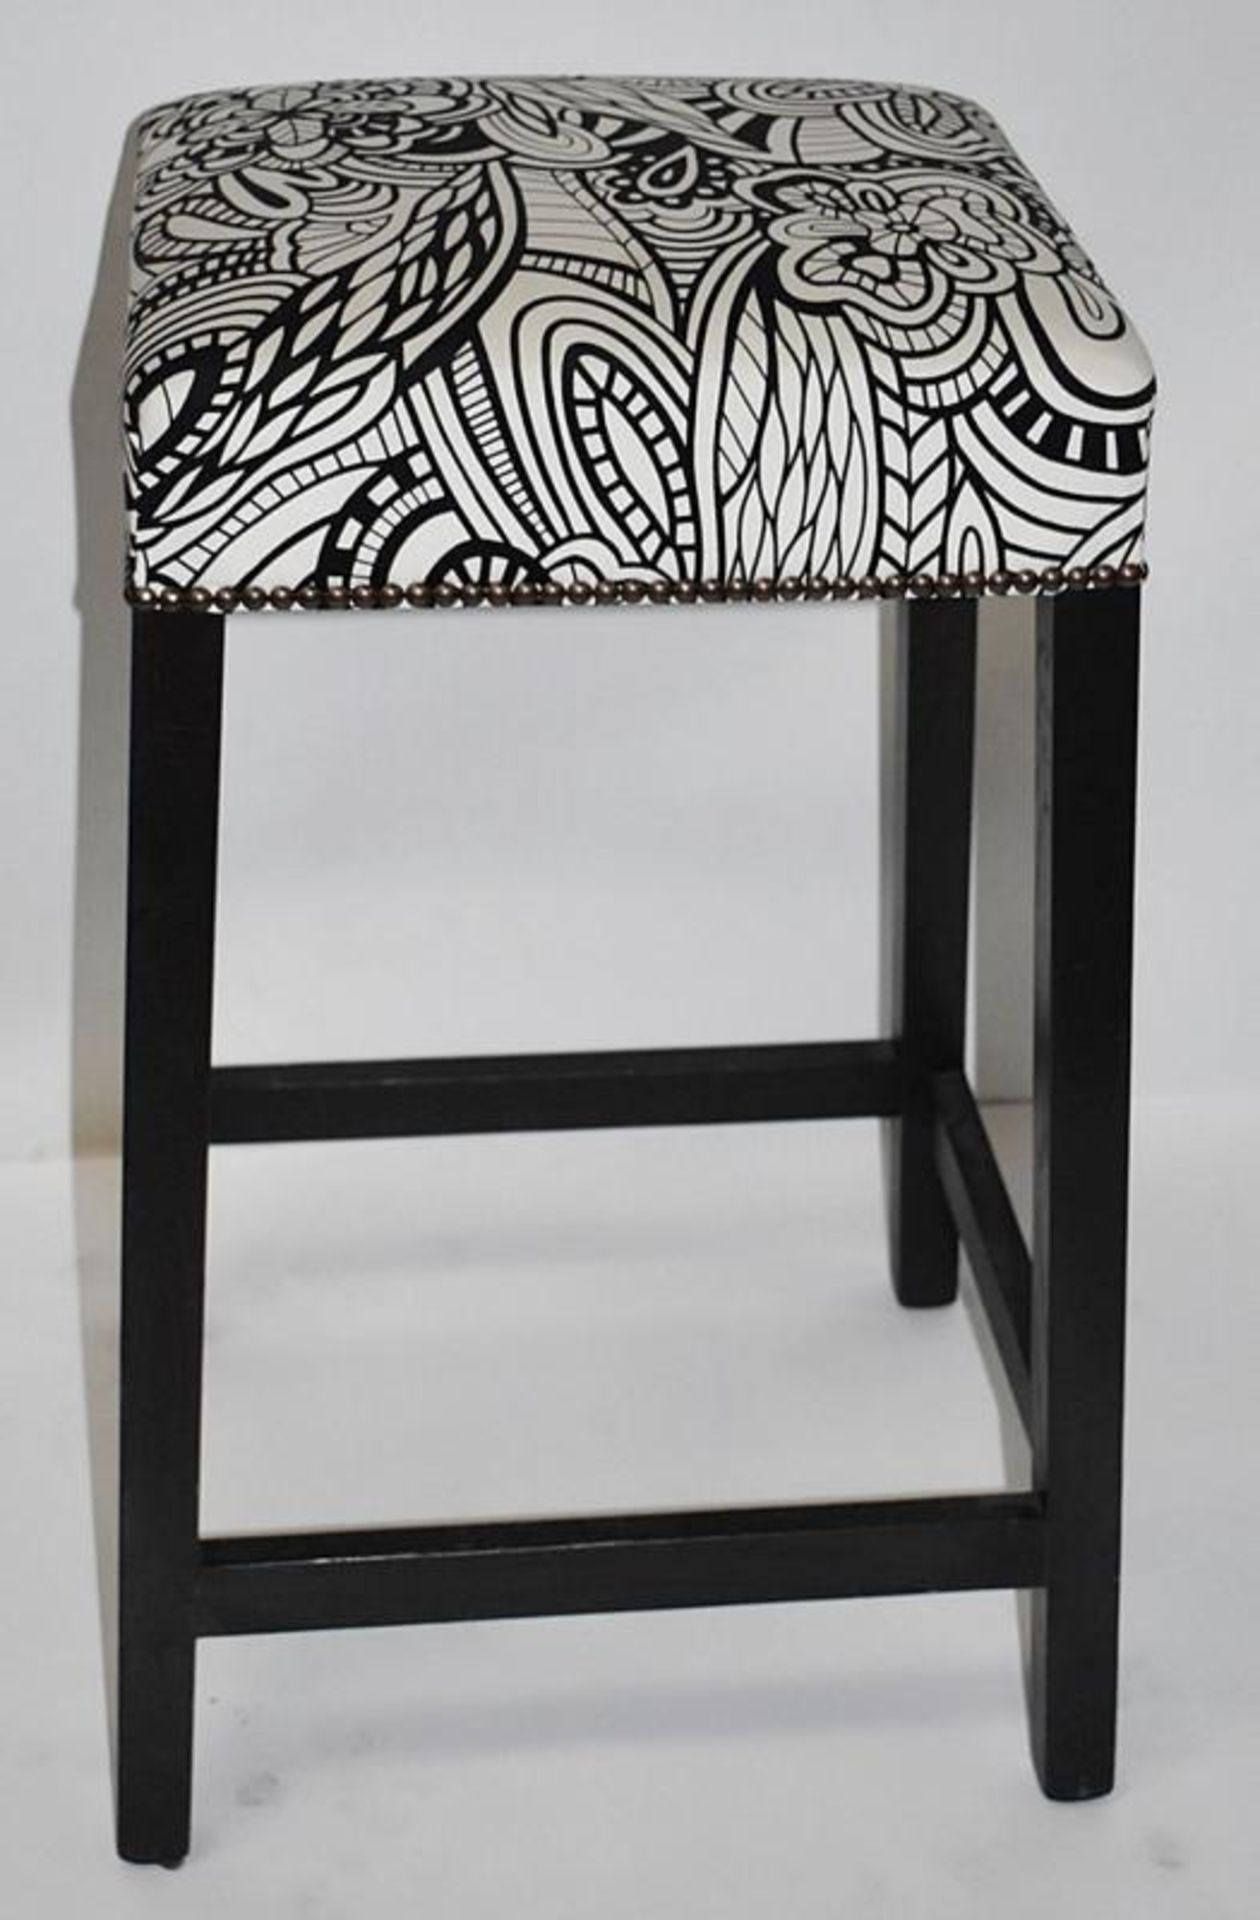 1 x Contemporary Bar Stool Upholstered In A Chic Designer Fabric - Recently Removed From A Famous De - Image 4 of 5